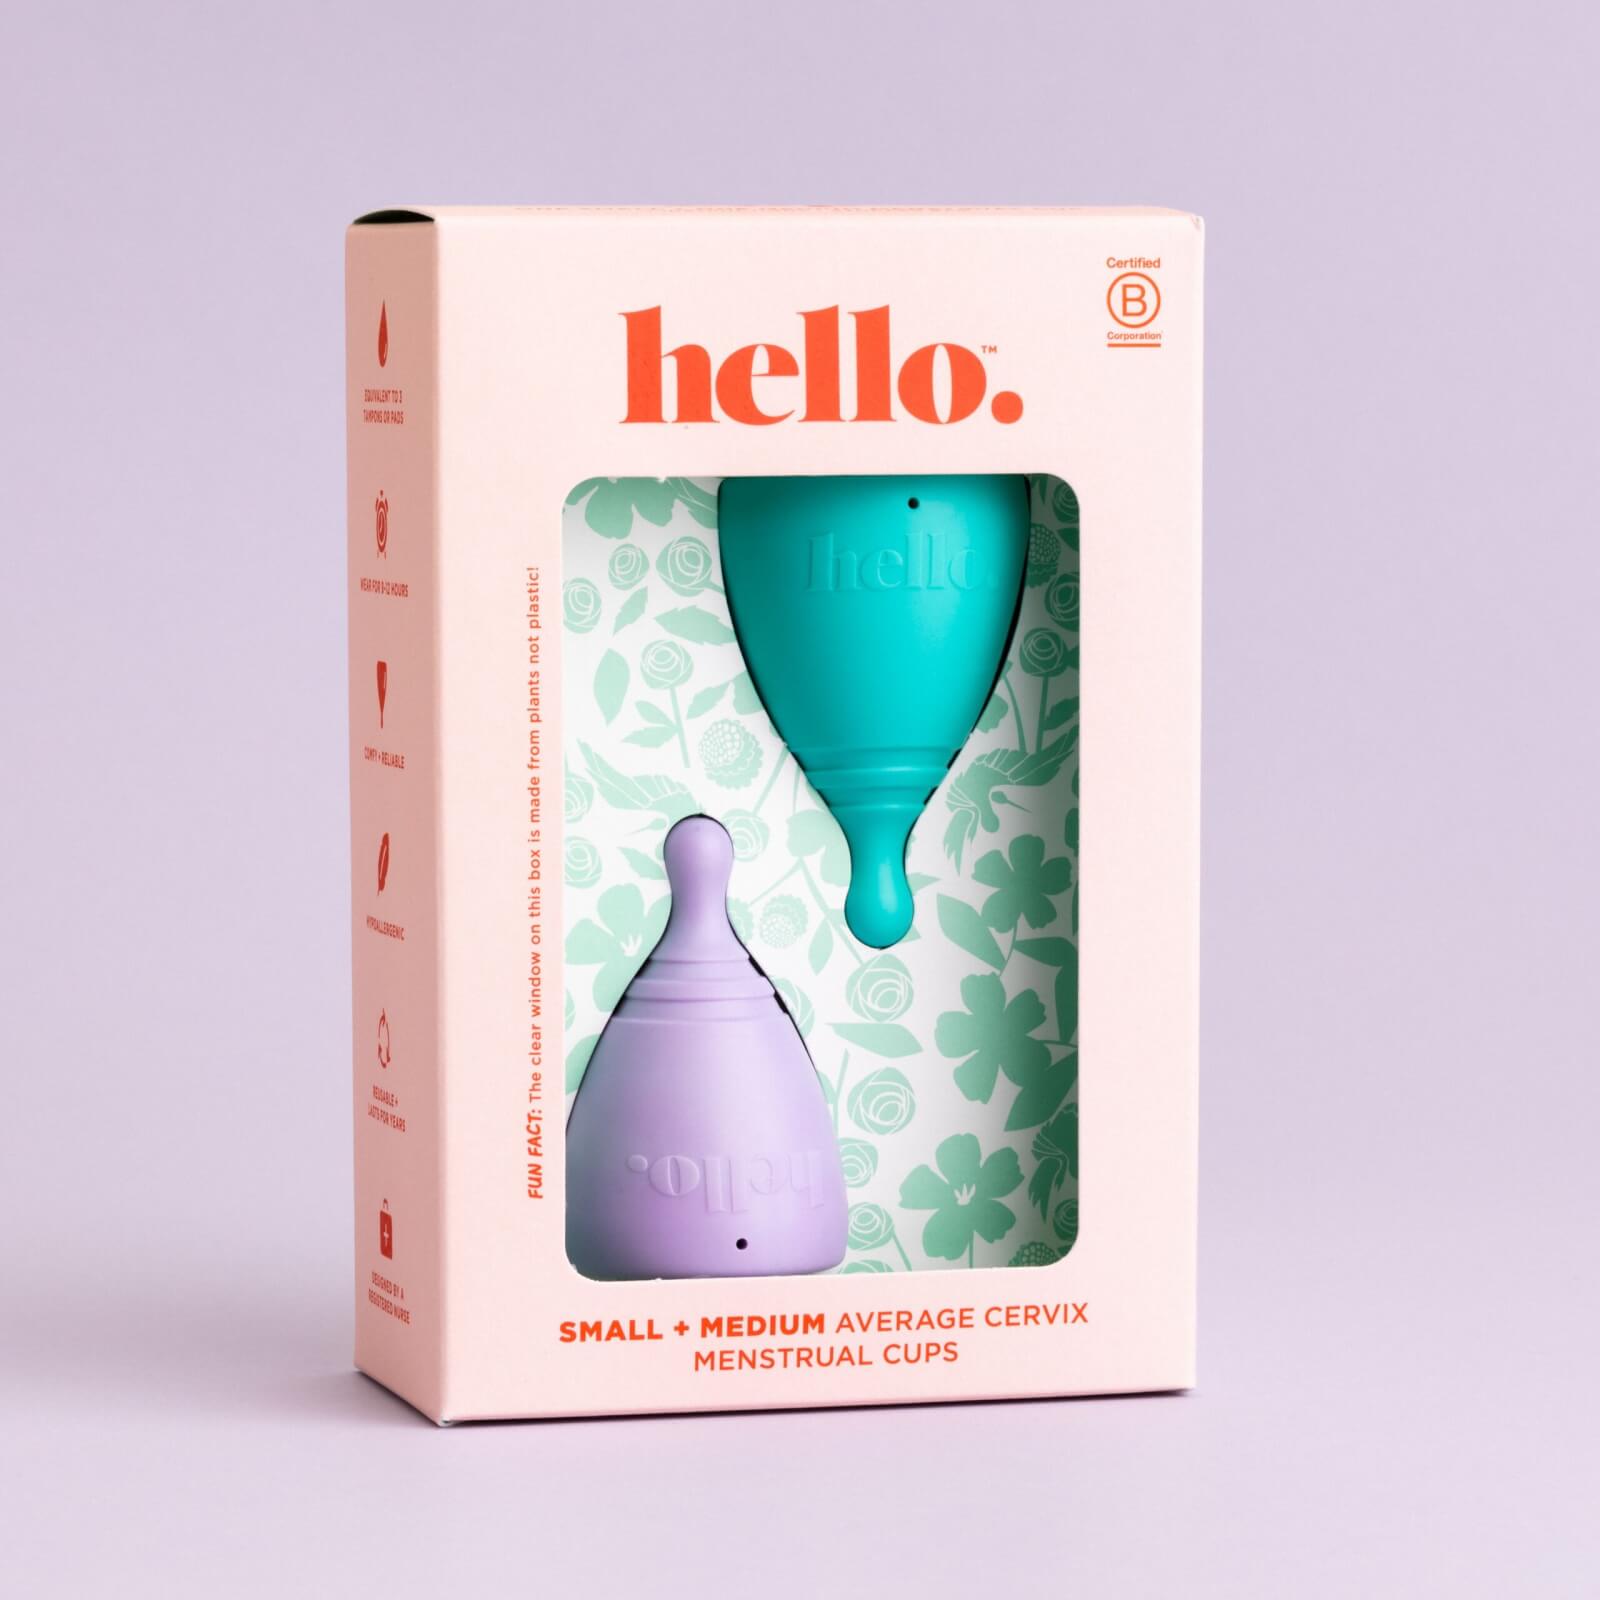 The Hello Cup Average Cervix Menstrual Cup